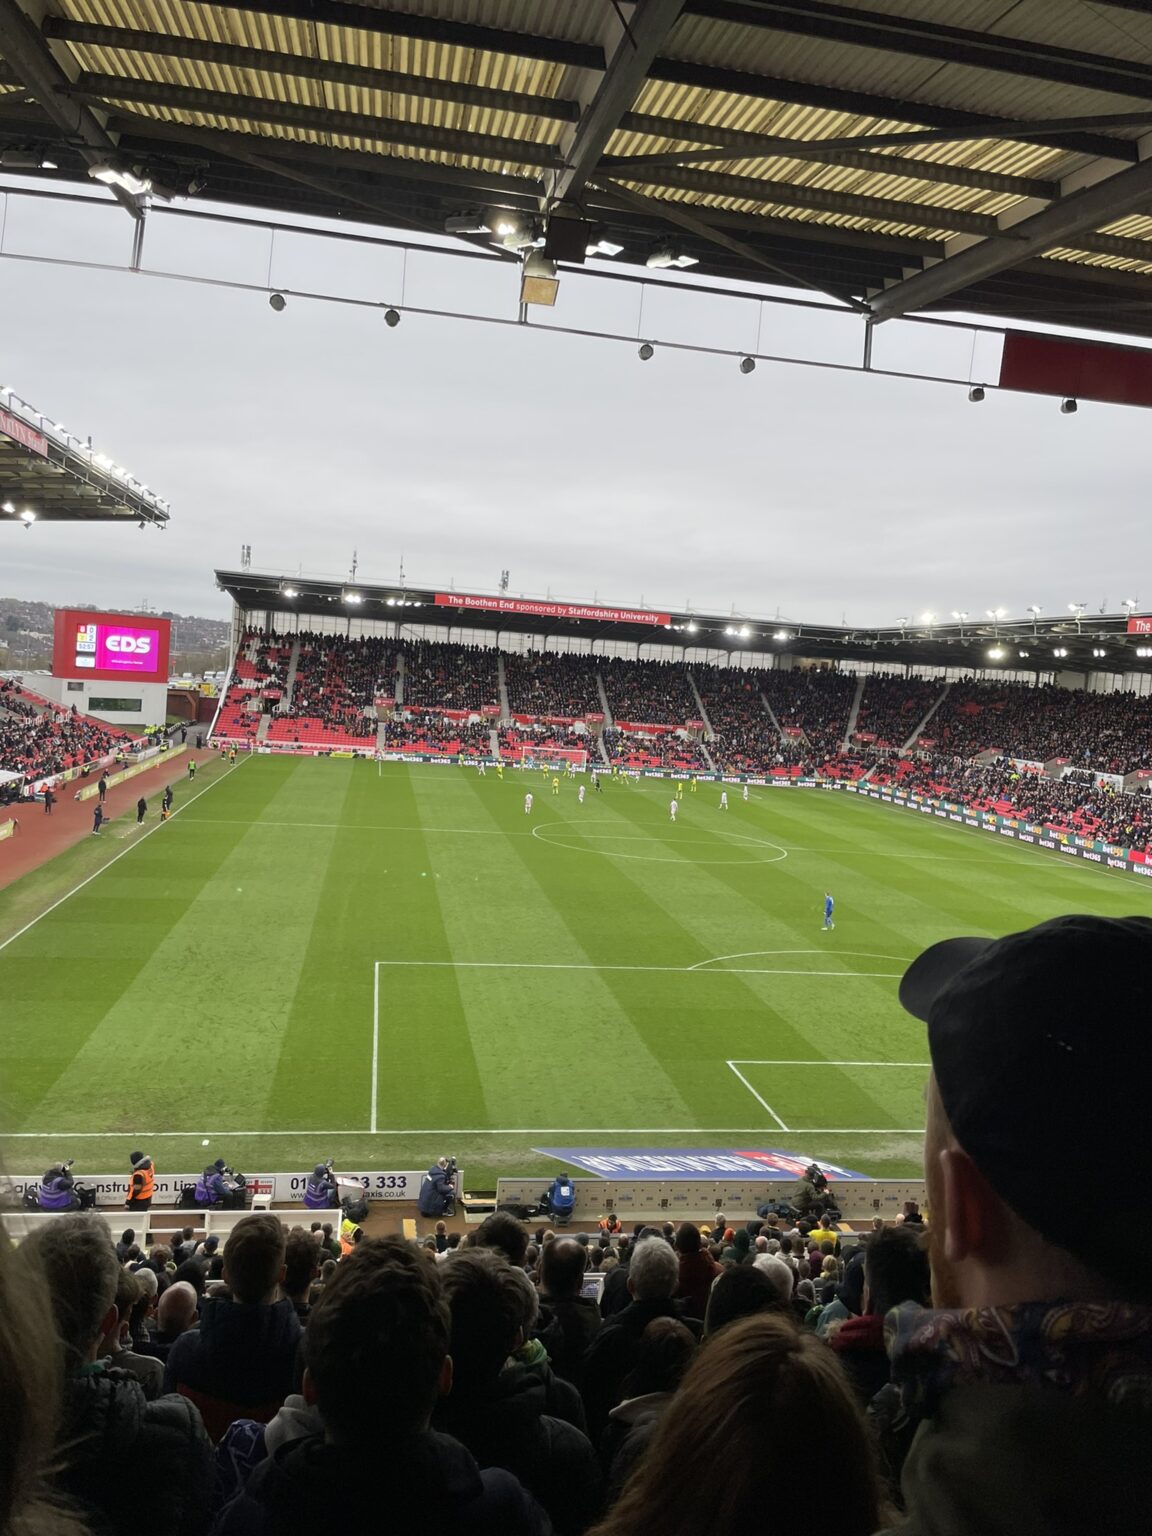 Stoke v Norwich - Shot by Reuben Clarke from the away section